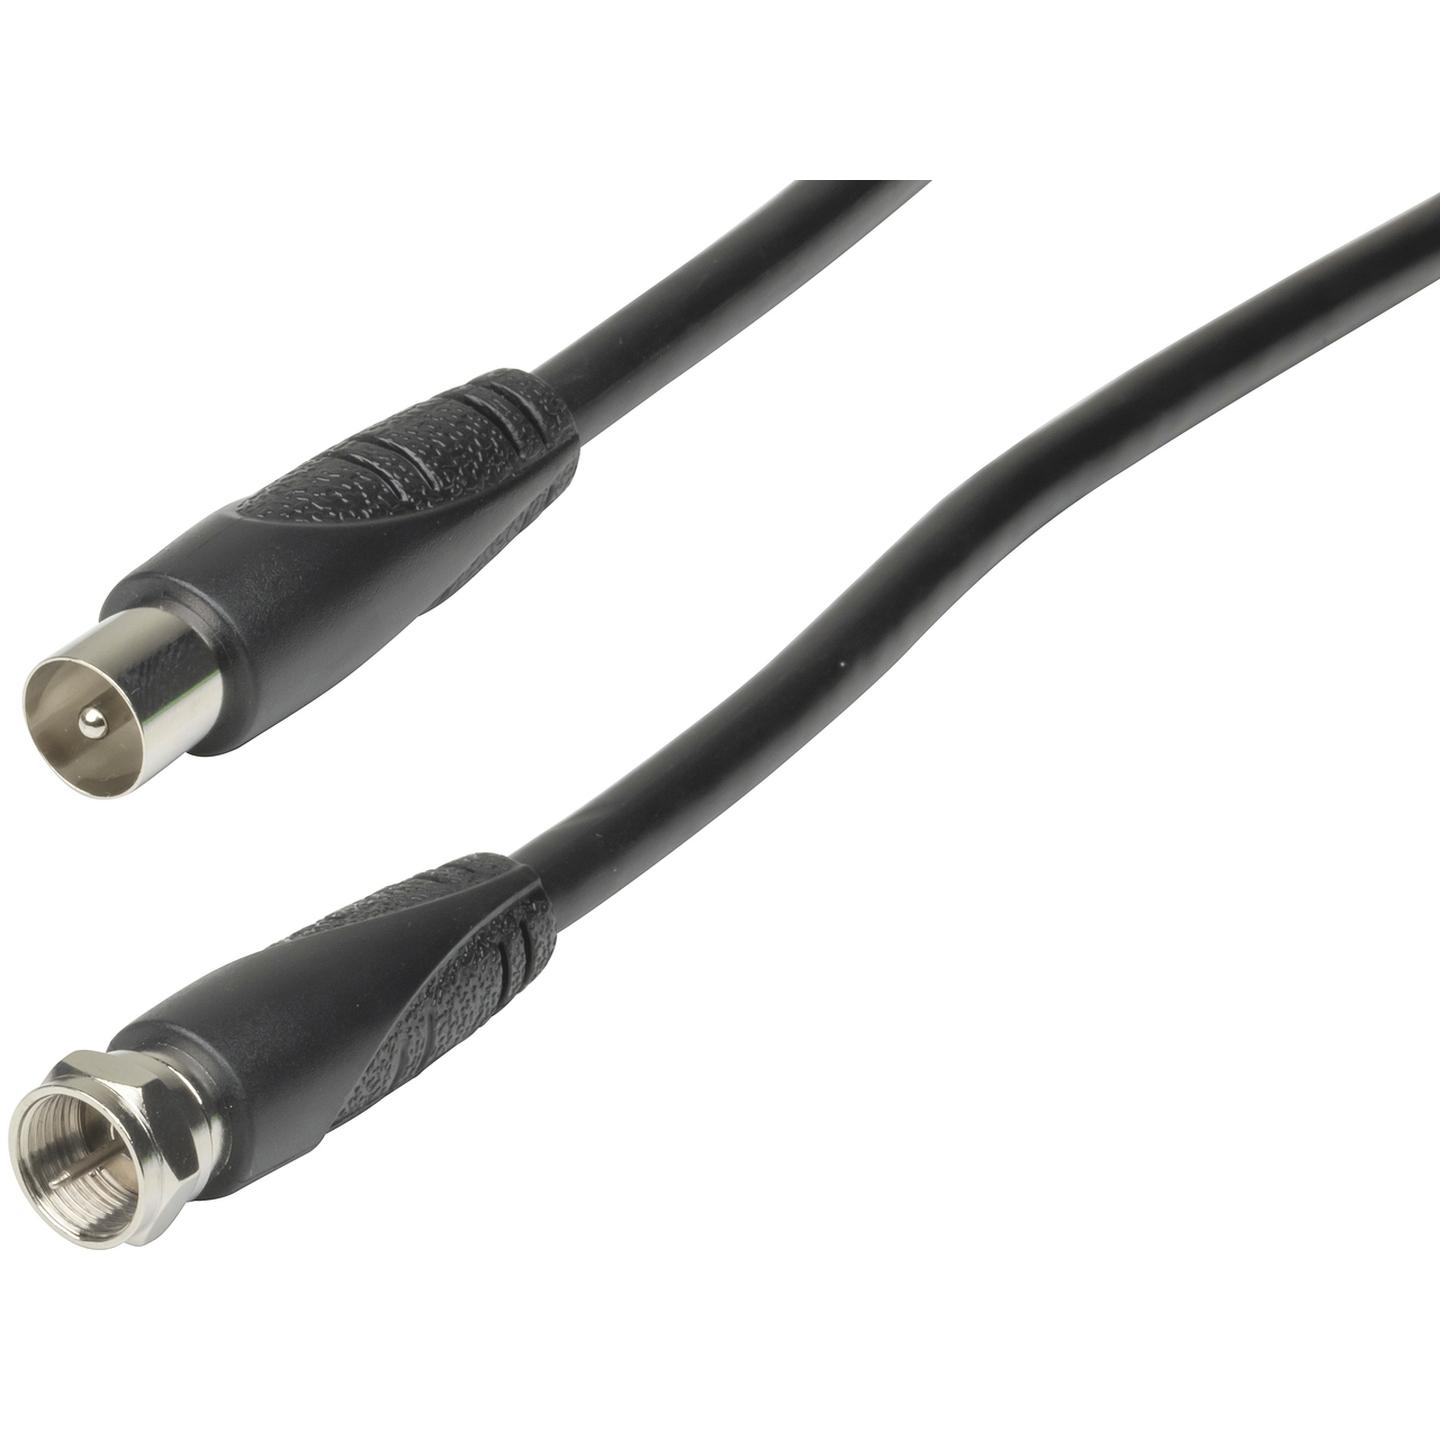 1.5m TV Antenna Cable - F Plug to TV Coaxial Plug